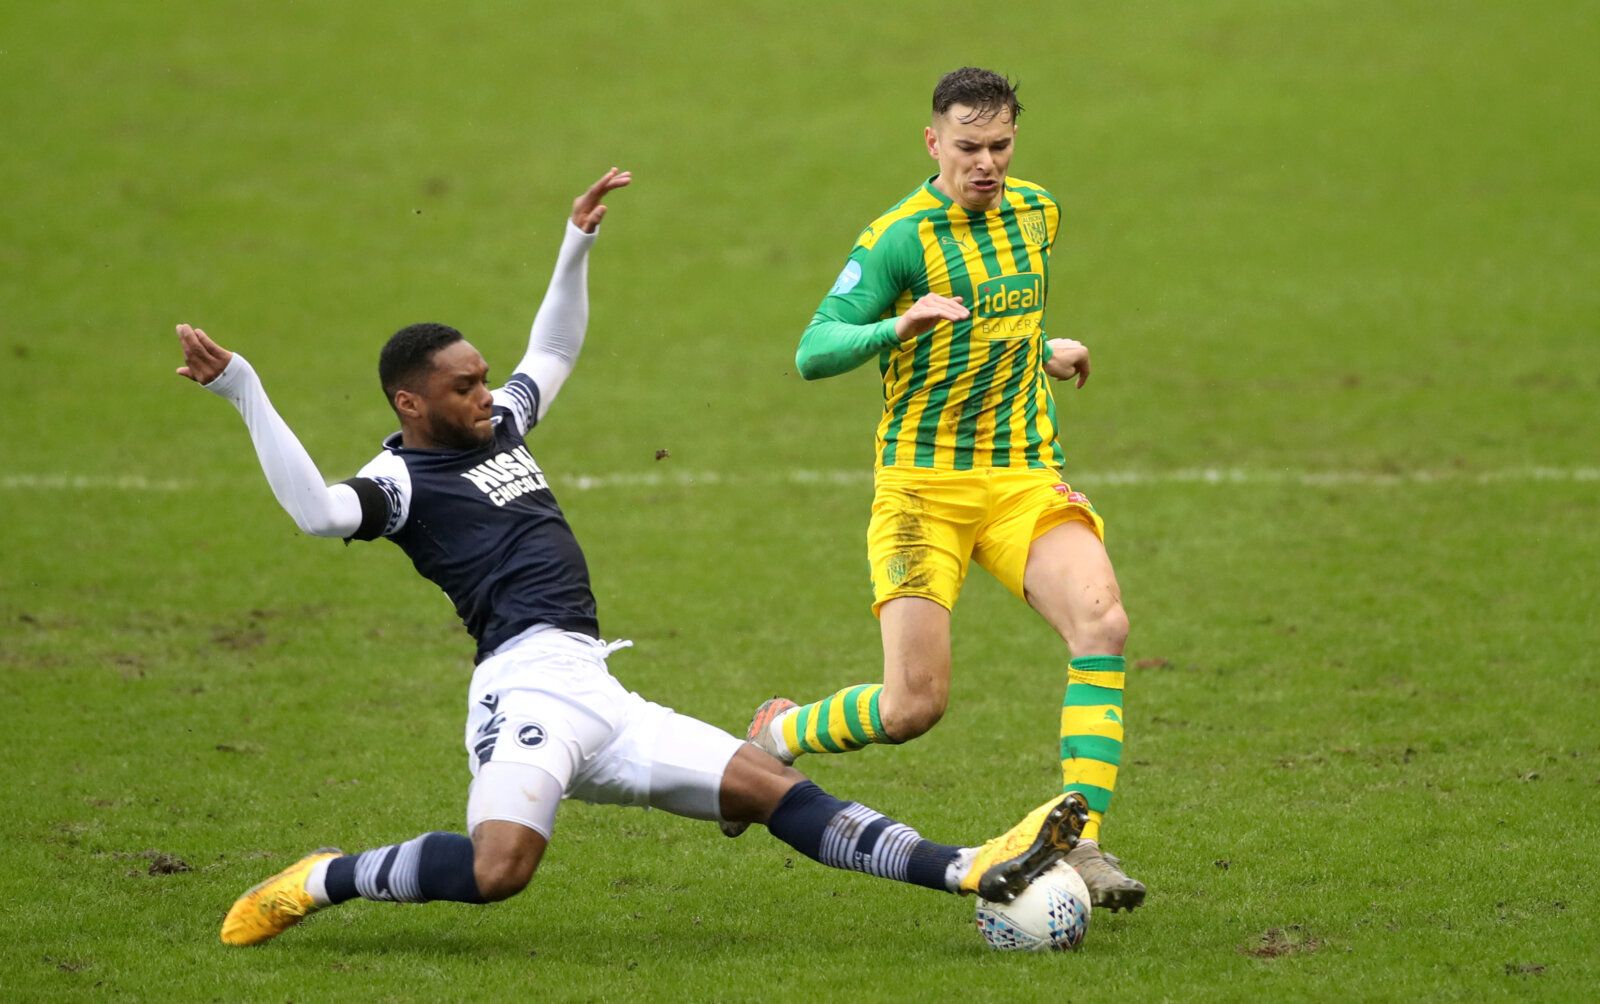 Soccer Football - Championship - Millwall v West Bromwich Albion - The Den, London, Britain - February 9, 2020   Millwall's Mahlon Romeo in action with West Bromwich Albion's Conor Townsend   Action Images/Peter Cziborra    EDITORIAL USE ONLY. No use with unauthorized audio, video, data, fixture lists, club/league logos or "live" services. Online in-match use limited to 75 images, no video emulation. No use in betting, games or single club/league/player publications.  Please contact your account